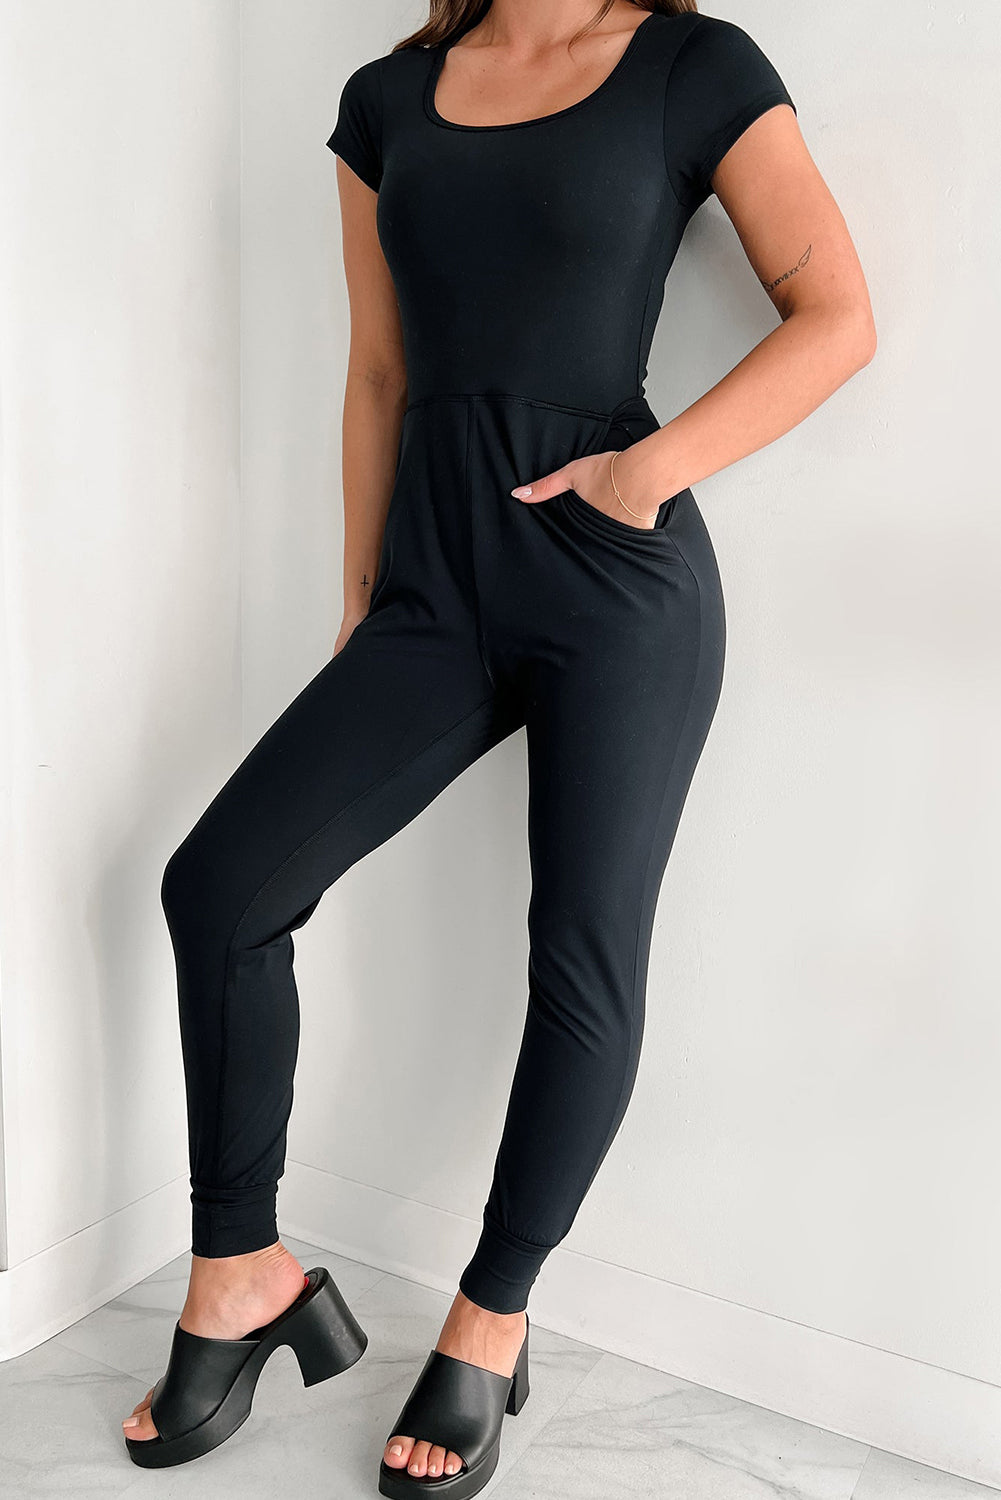 Best Rompers and Jumpsuits on Amazon 2019 | POPSUGAR Fashion UK